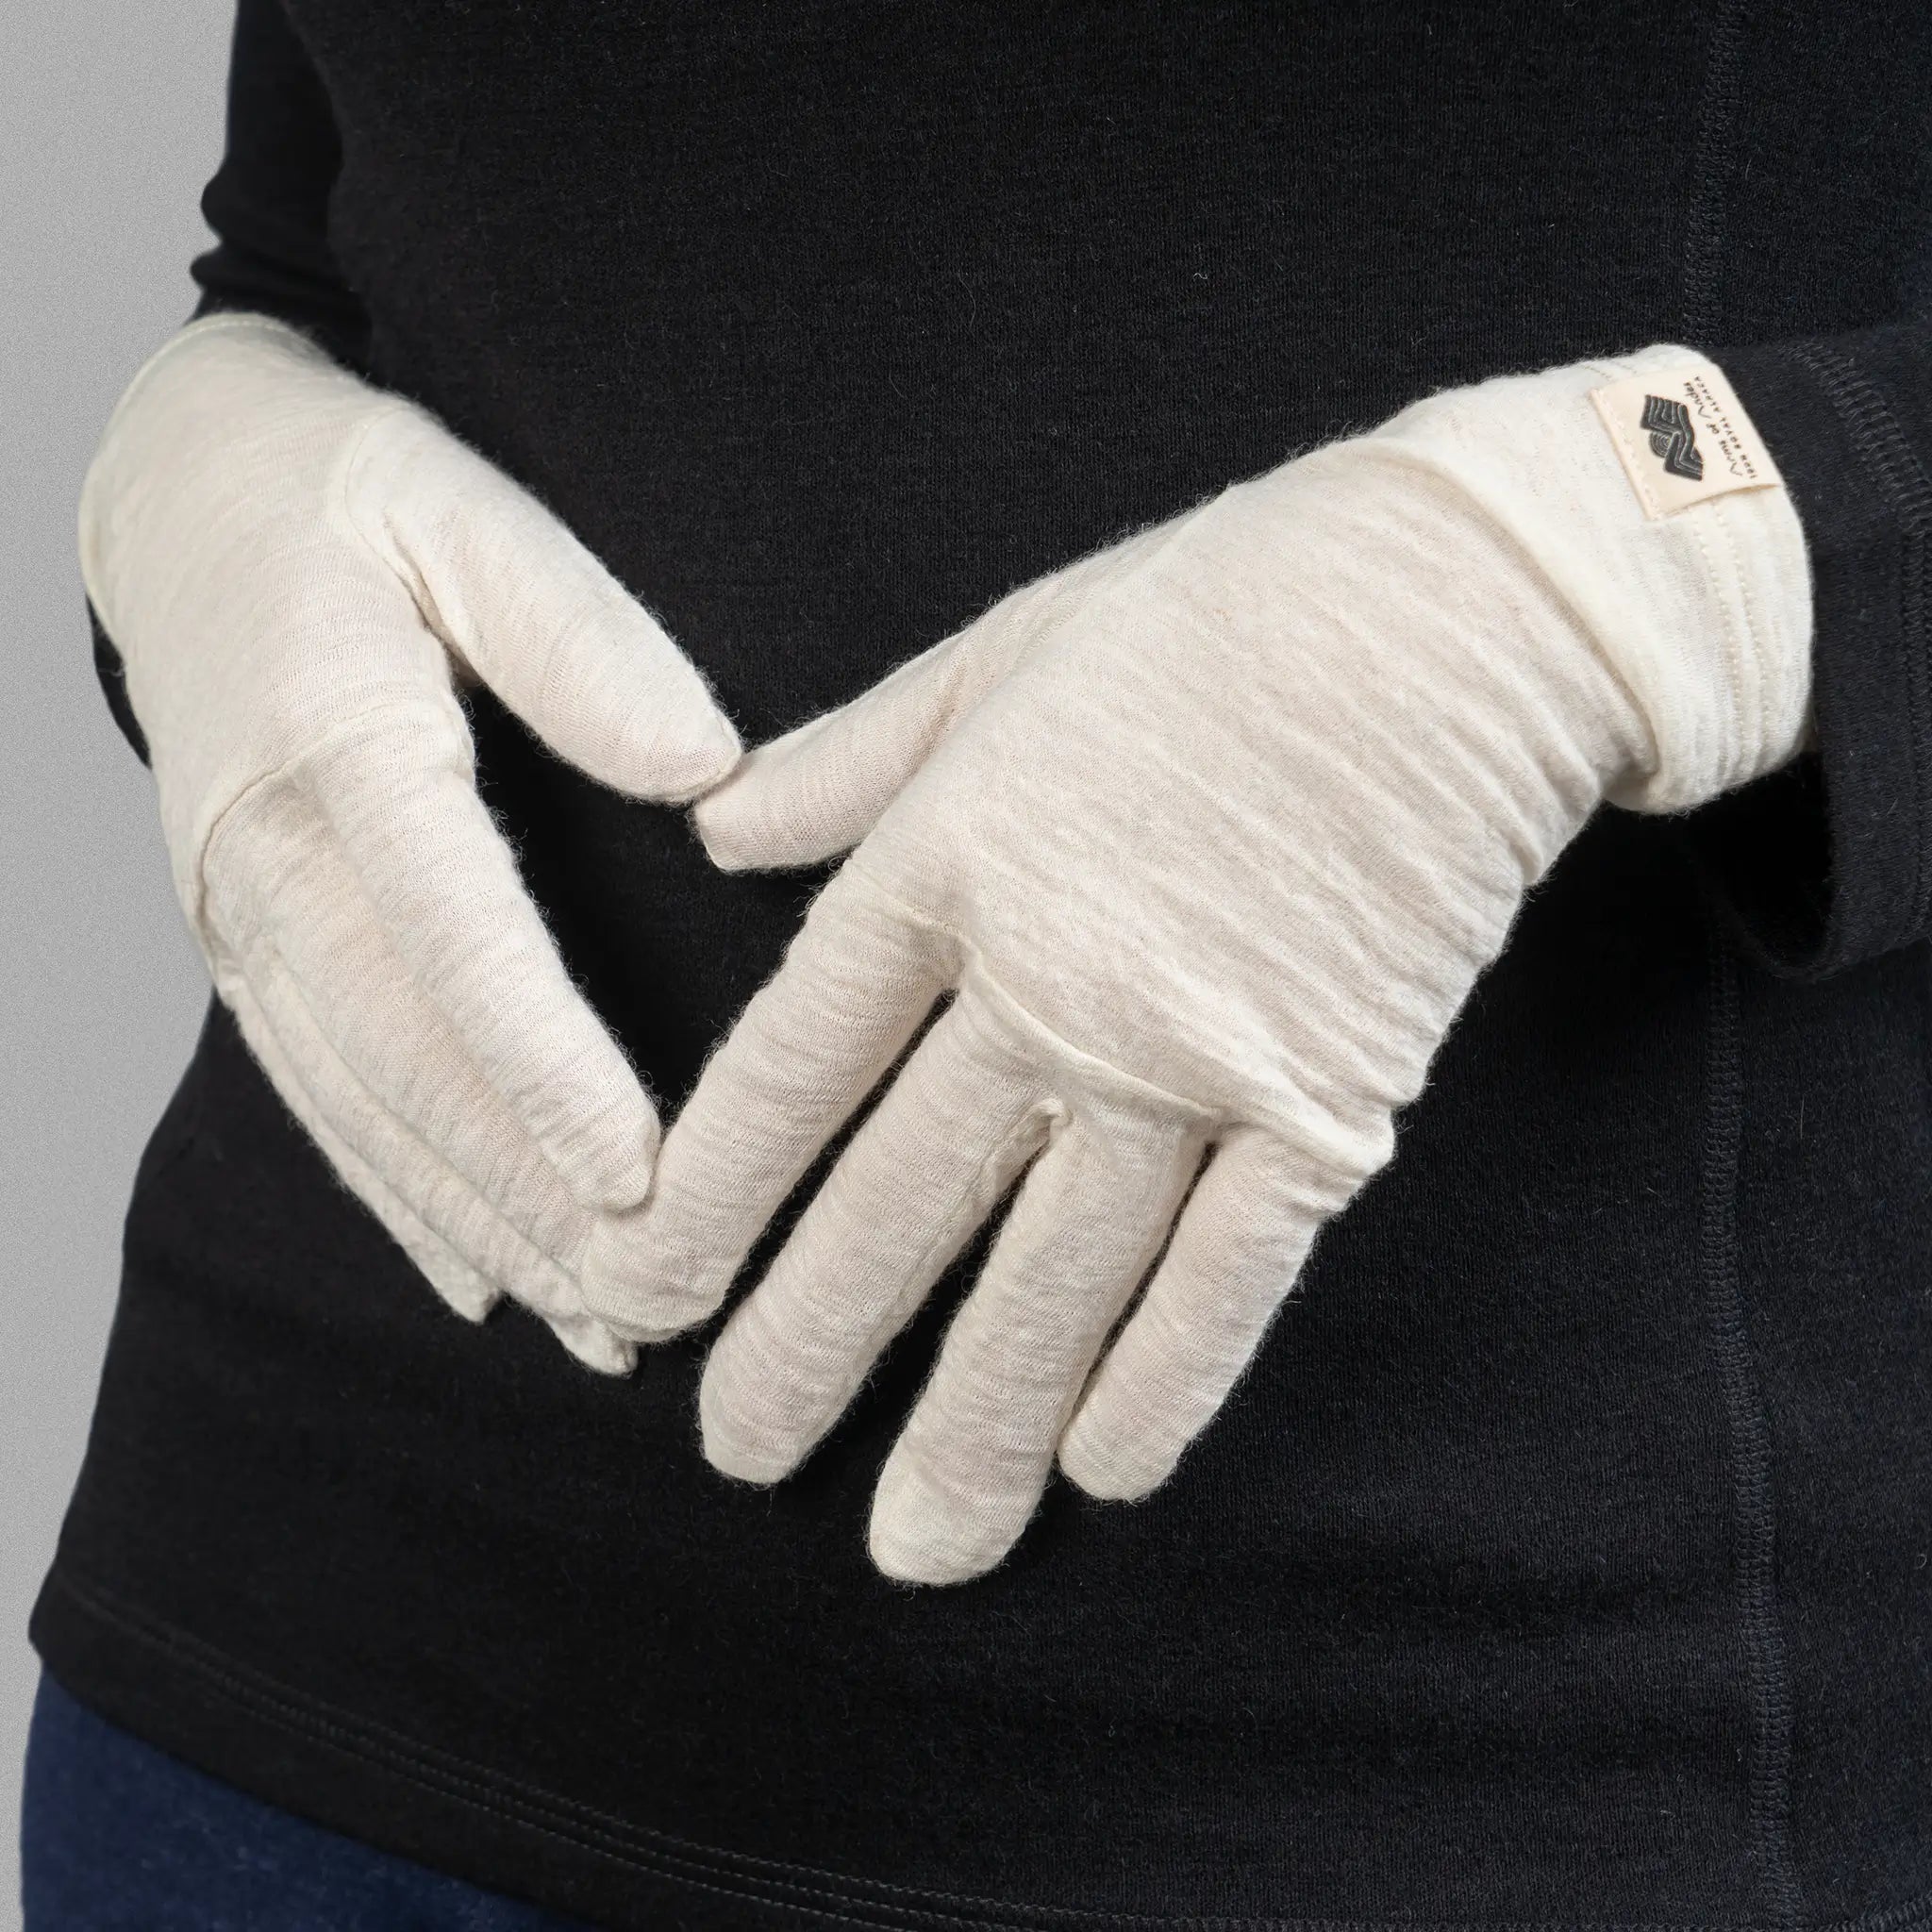 Unisex Alpaca Wool Glove Liners: 160 Ultralight color Natural White